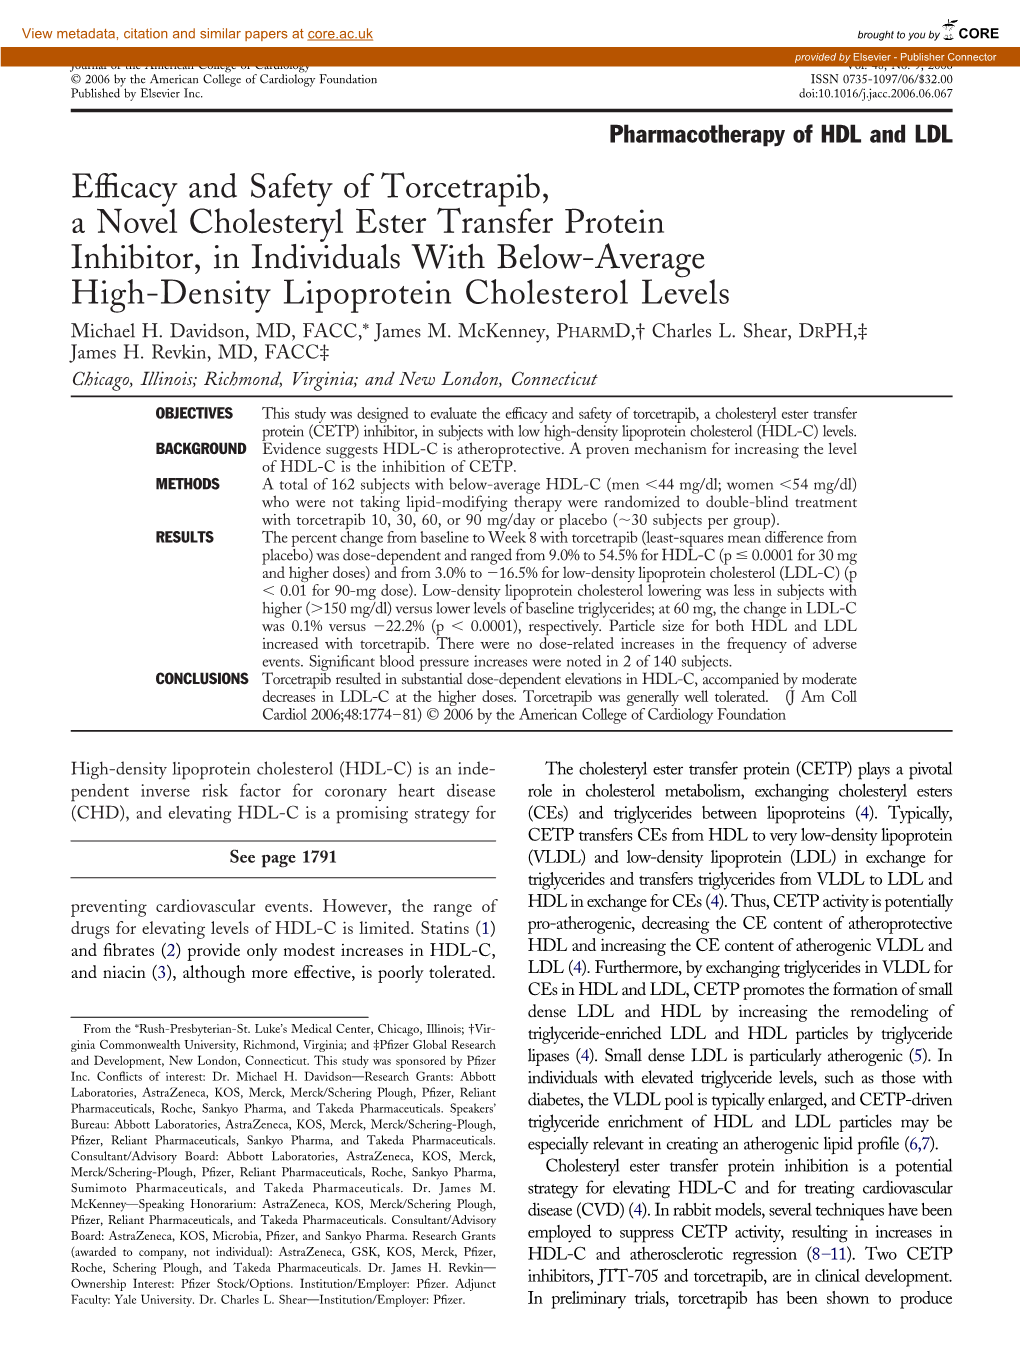 Efficacy and Safety of Torcetrapib, a Novel Cholesteryl Ester Transfer